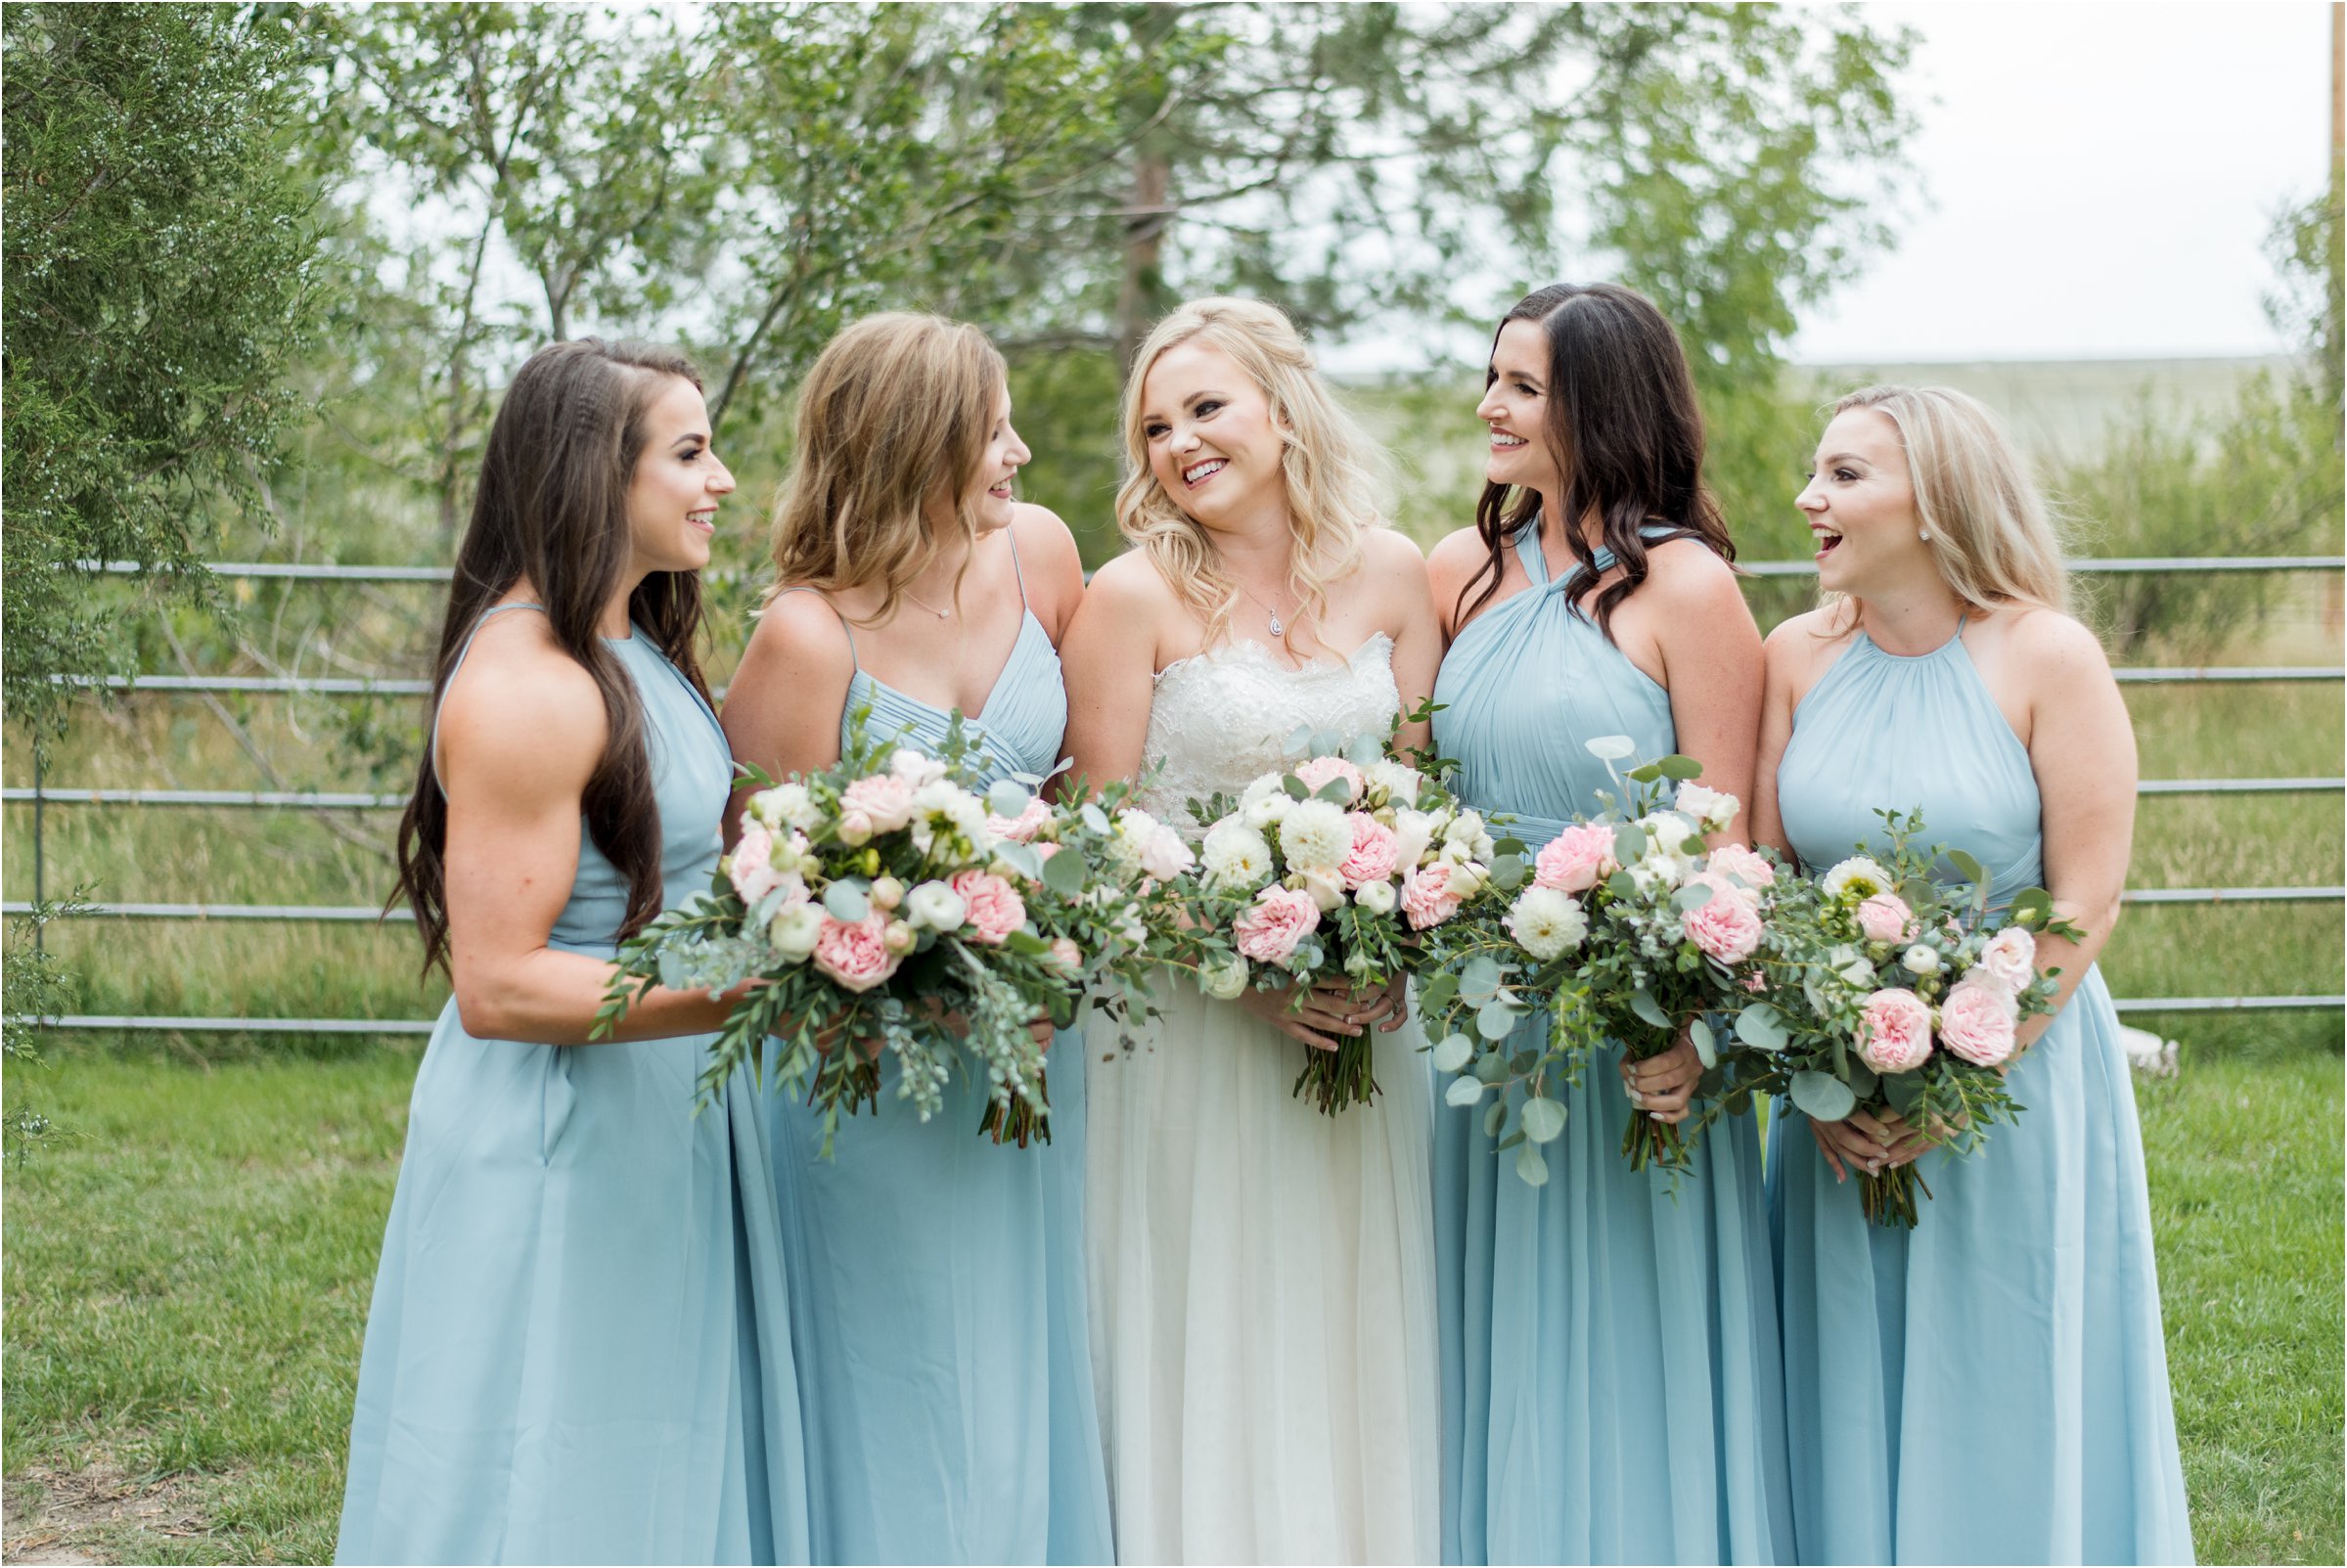 the bridesmaids dressed in light blue hold their bouquets and look toward the bride